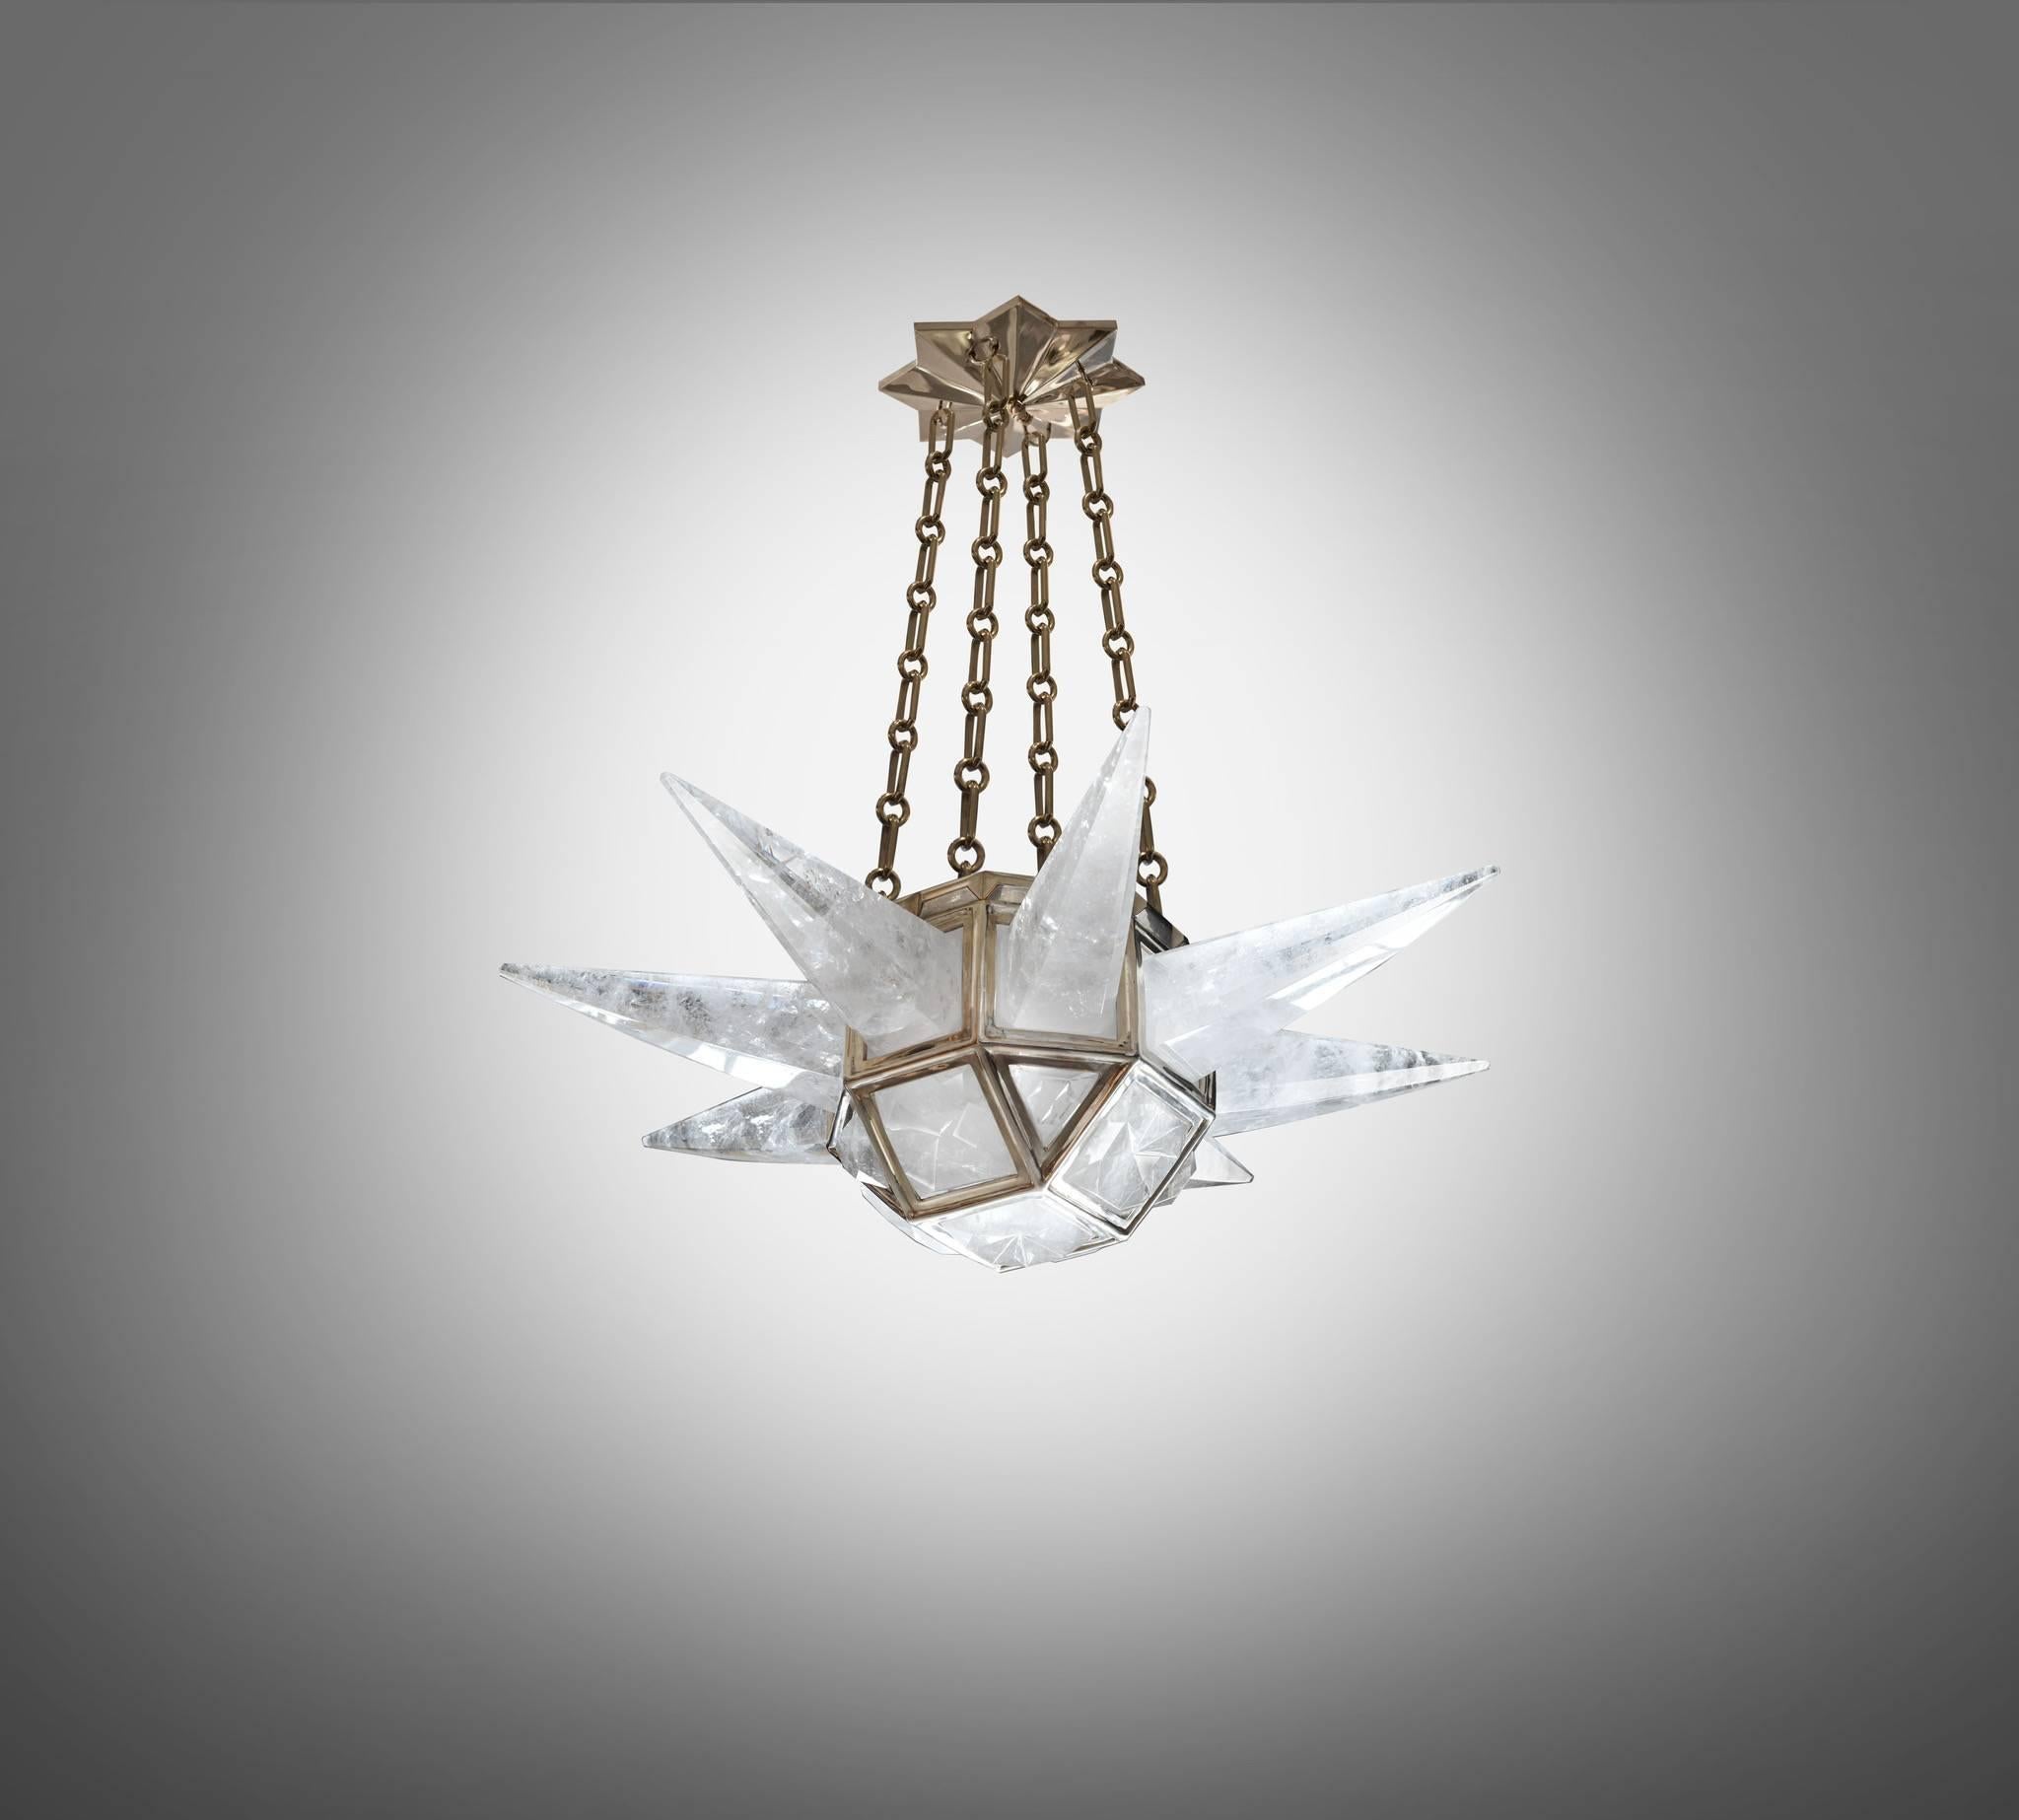 A fine carved contemporary rock crystal quartz chandelier with eight spikes, polished nickel finished frame, created by Phoenix Gallery, NYC.
Height can be adjustable.
Available in nickel plating and antique brass finish.

